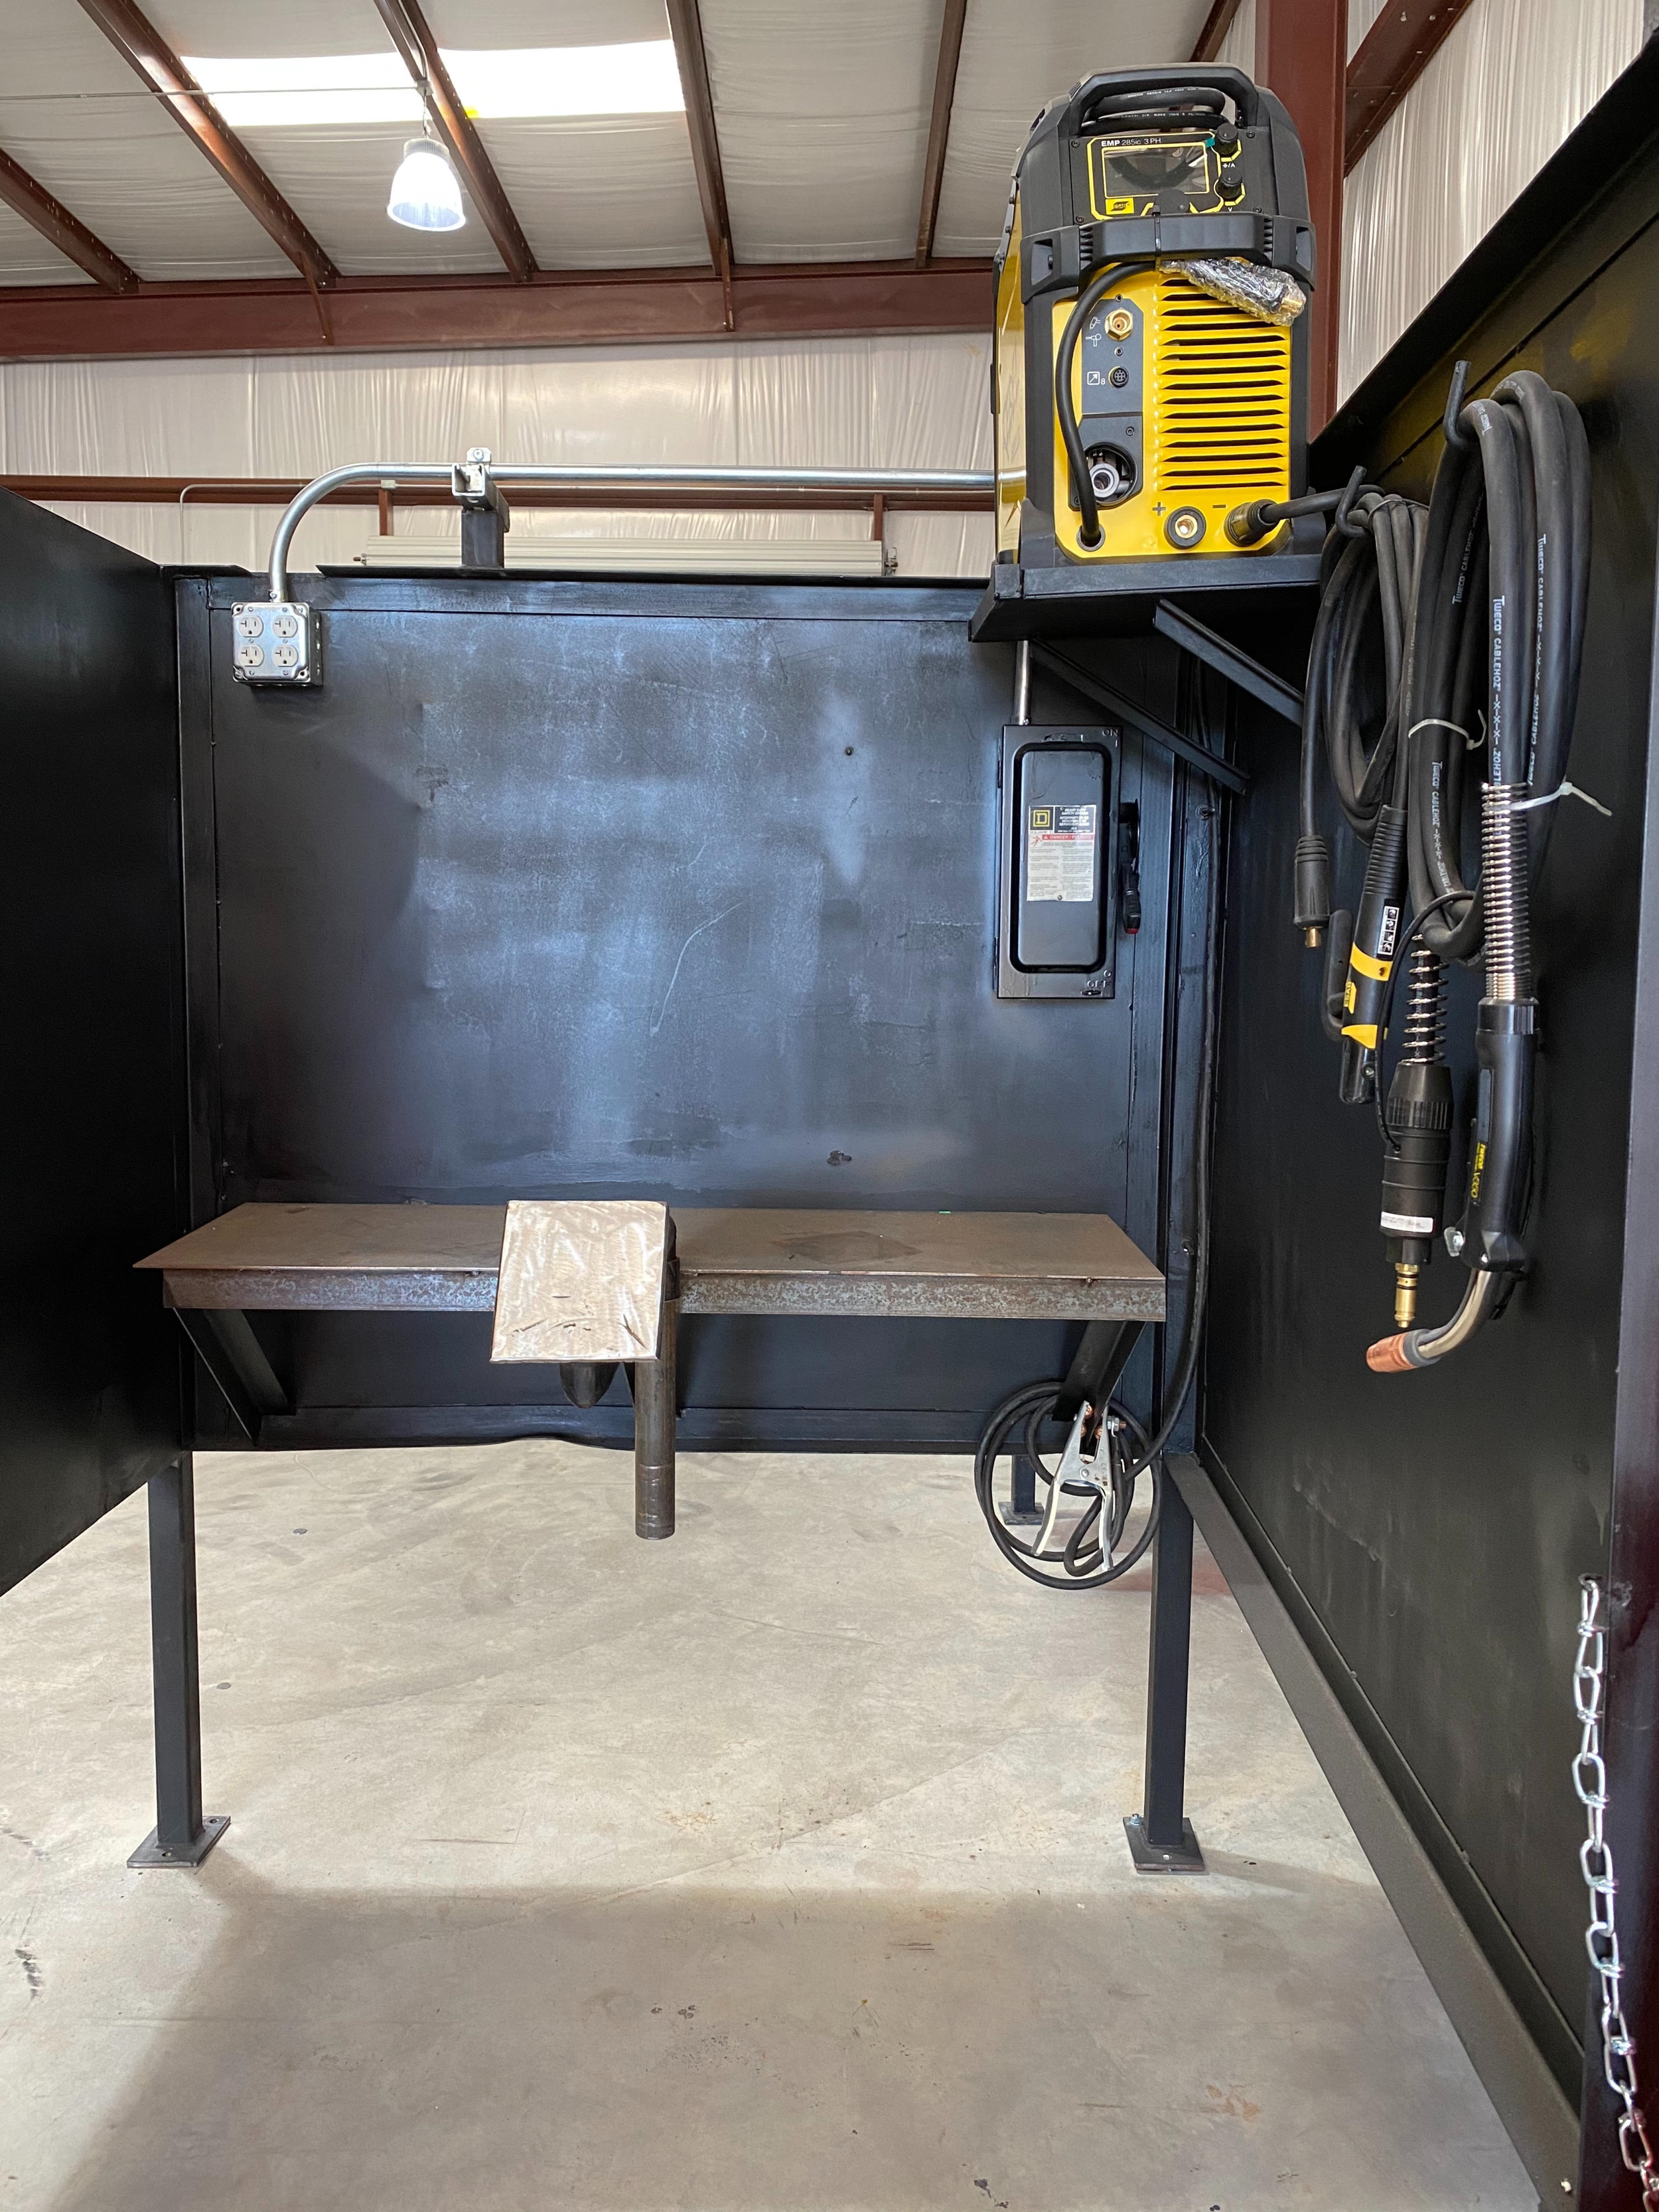  Precision Welding Academy provides clean, spacious, and powerful booths to perfect your craft. 